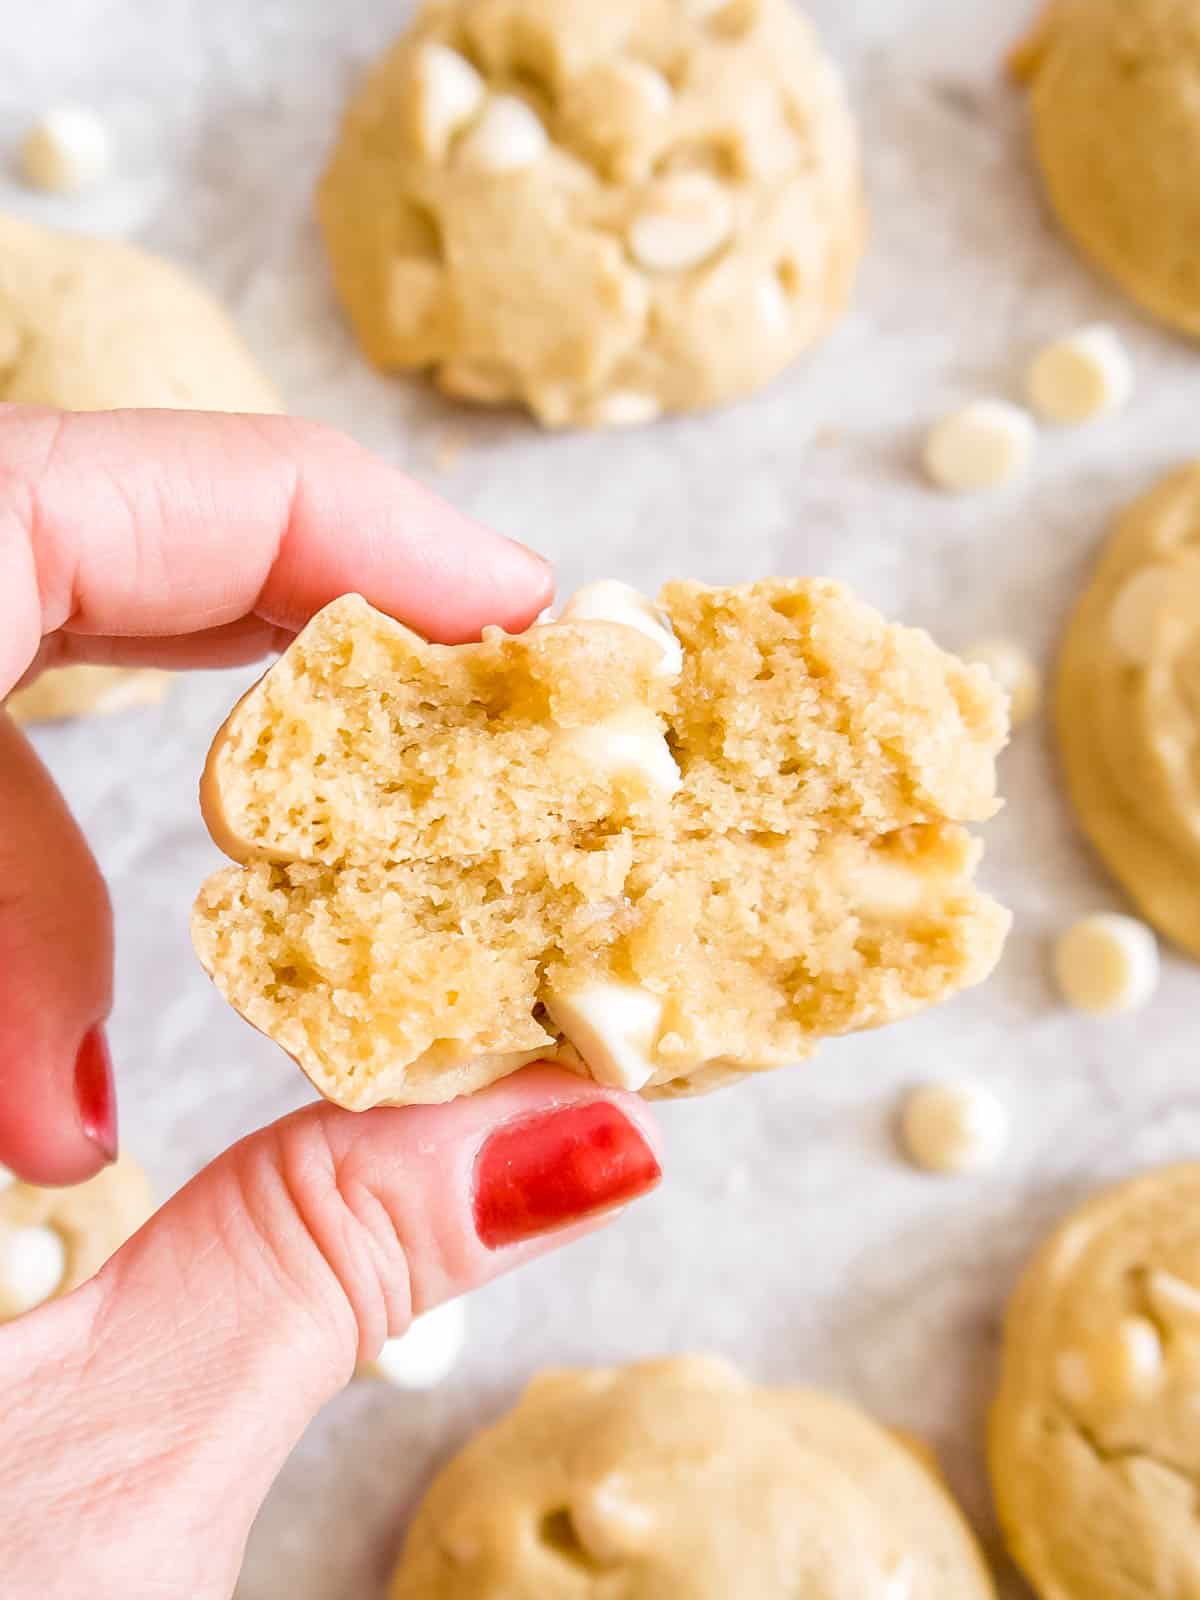 White chocolate chip cookies cut in half.